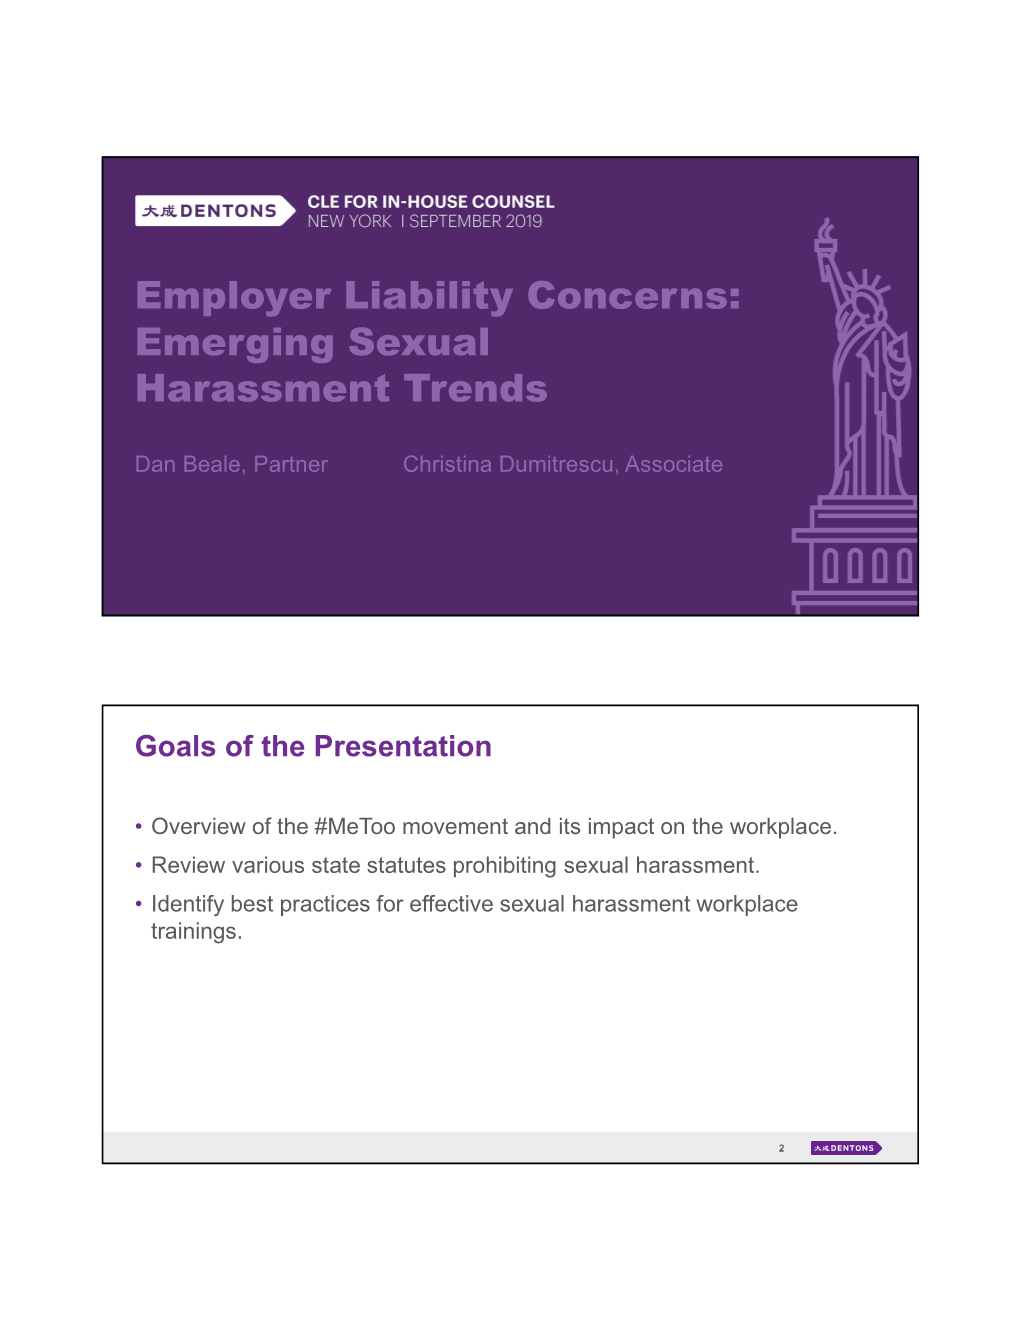 Employer Liability Concerns: Emerging Sexual Harassment Trends